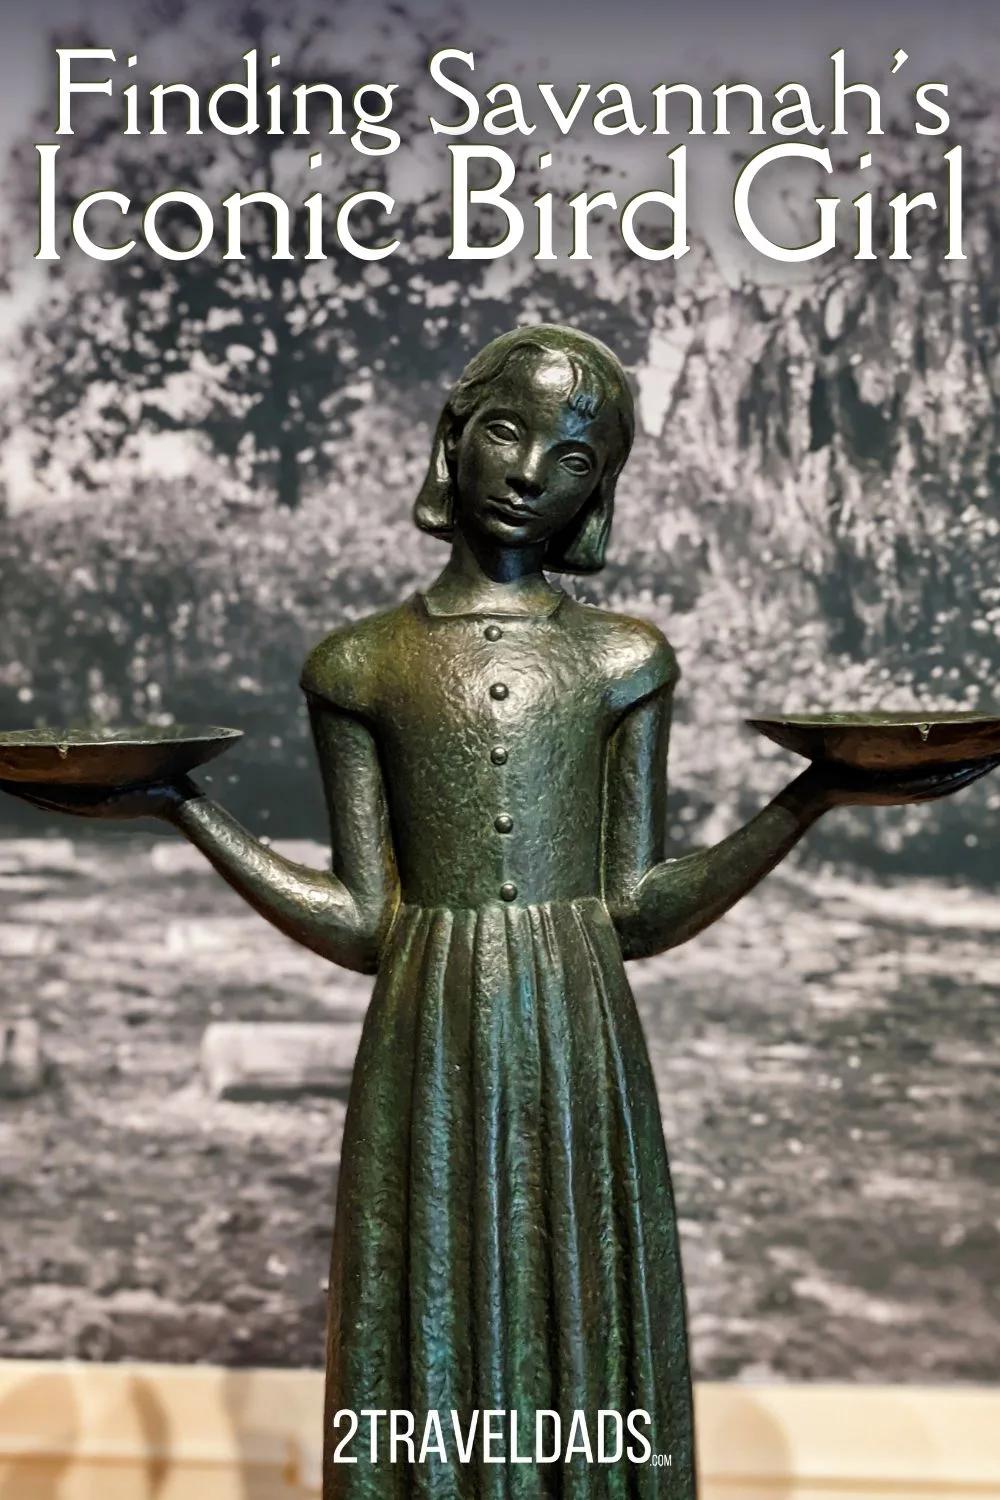 The Bird Girl is an icon of Savannah, made famous by Midnight in the Garden of Good and Evil. See how to visit Bird Girl, read about her story and plan more wonderful art to see in Savannah.